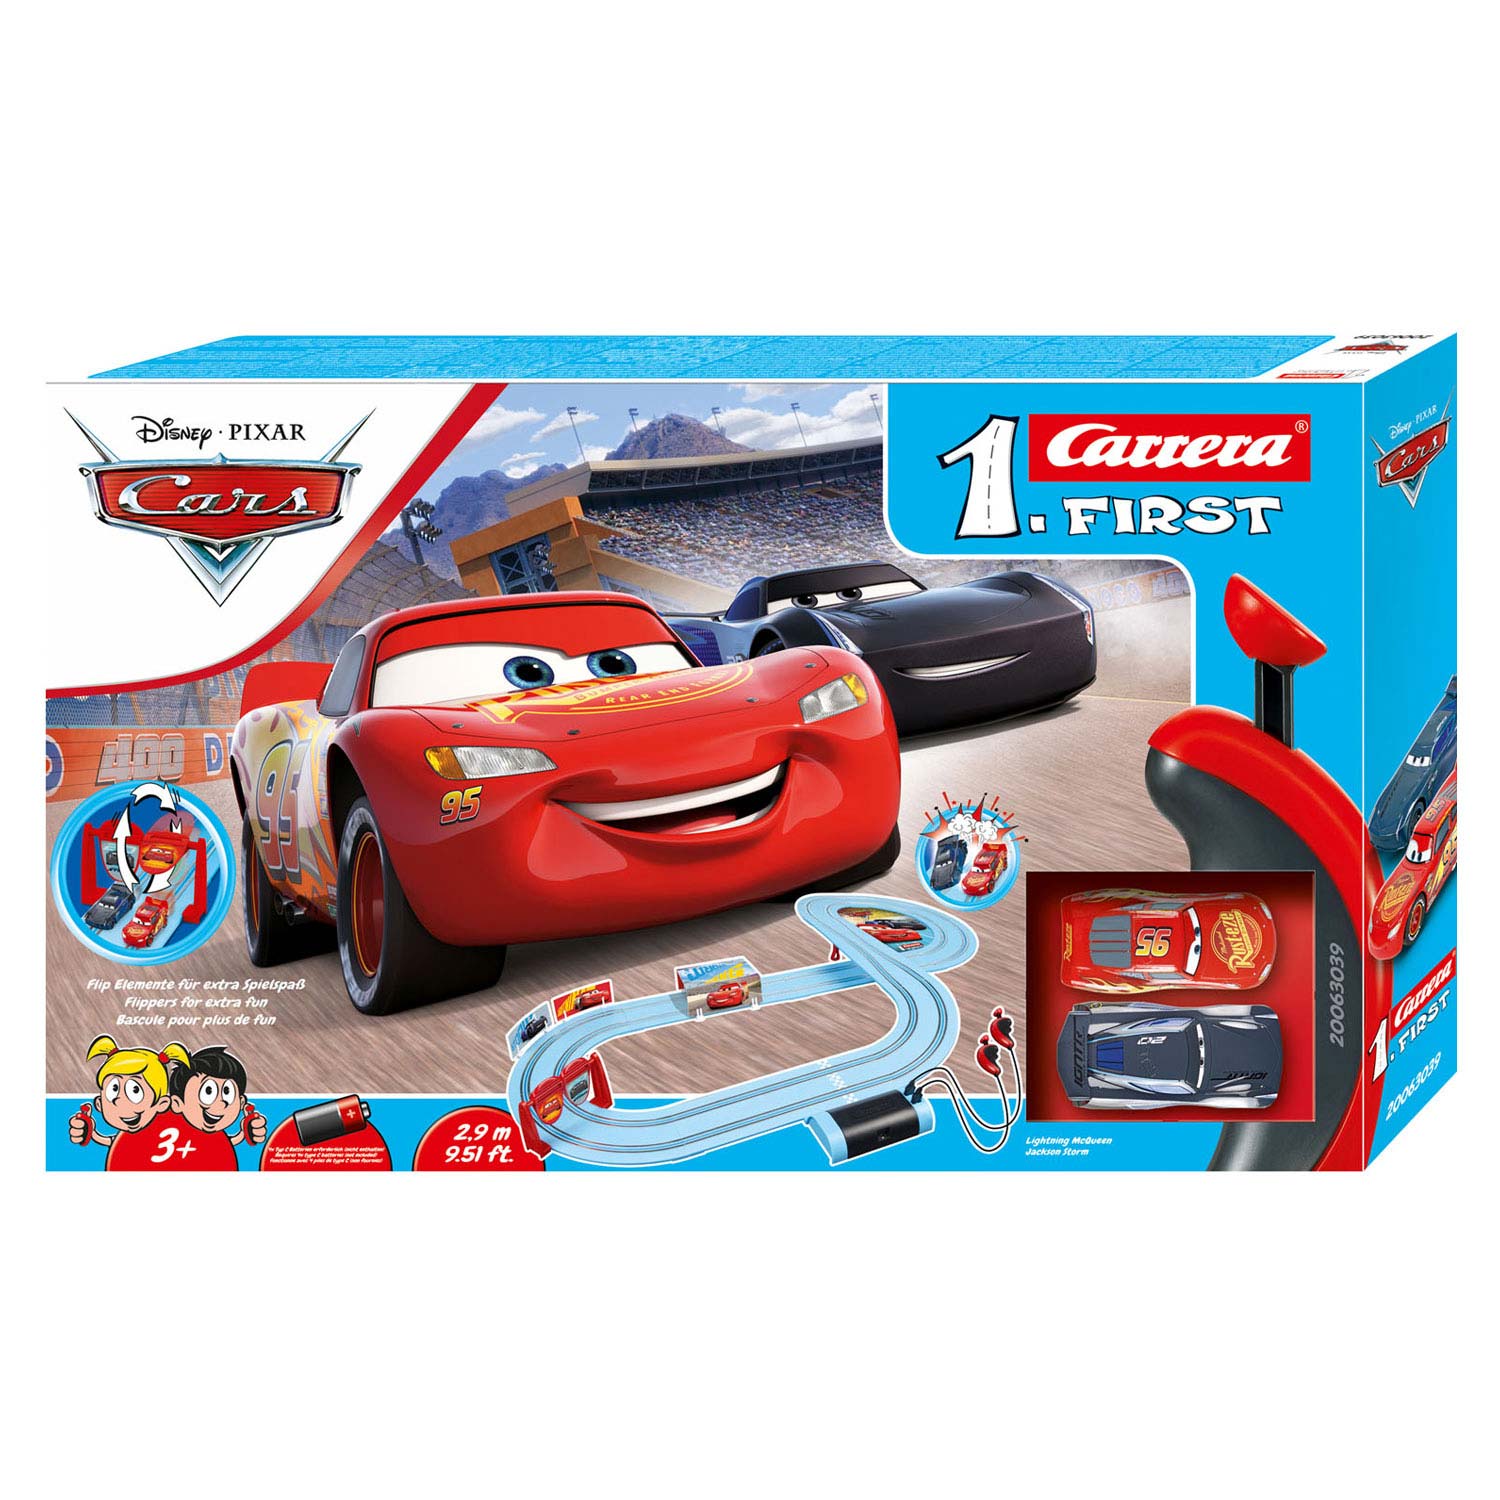 Beenmerg jas haai Carrera First Race Track - Cars Piston Cup | Thimble Toys